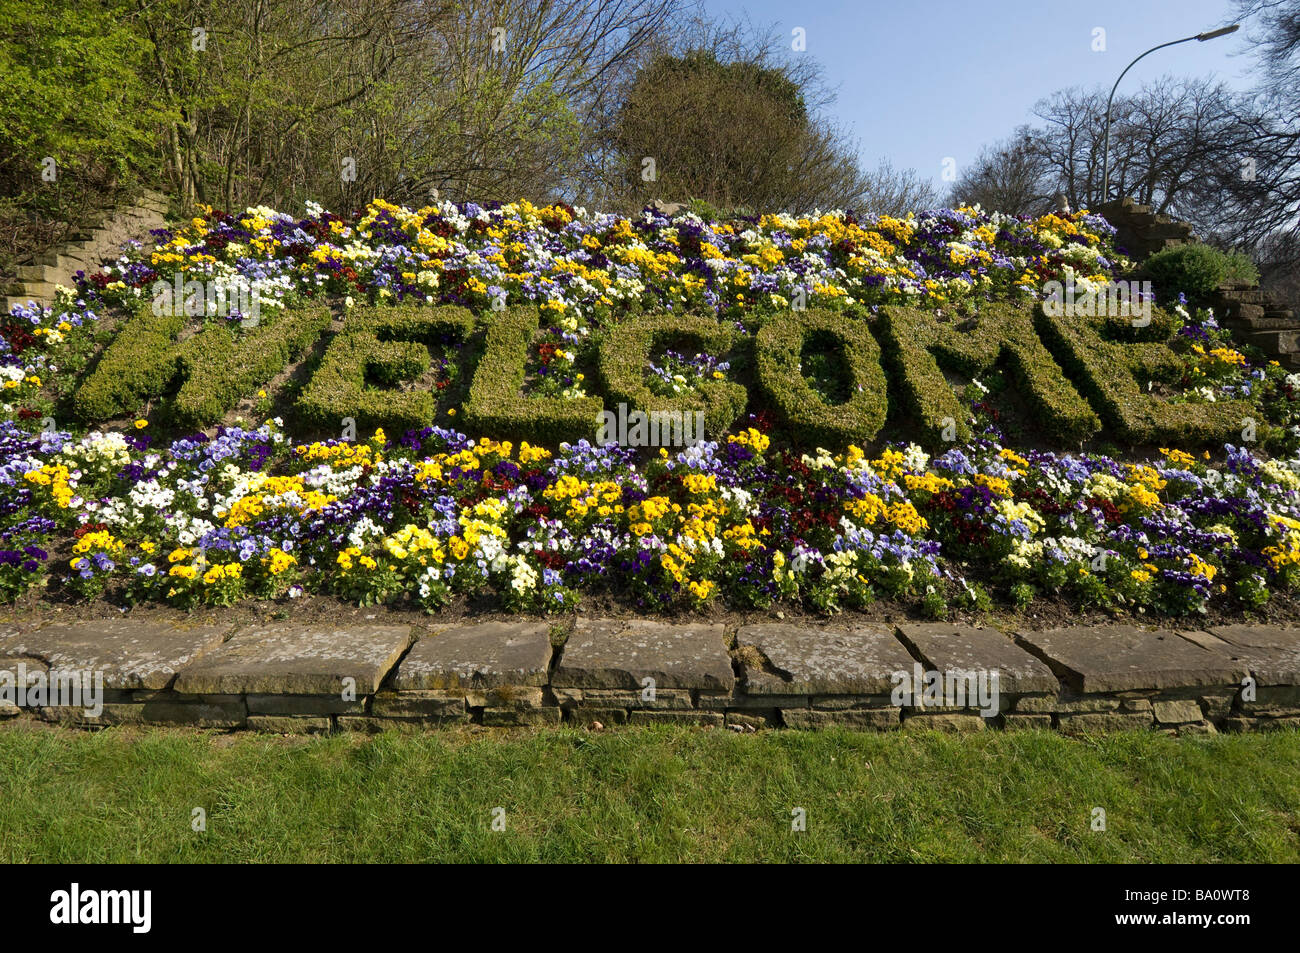 A welcome spelled out in plants greets visitors driving into the city of Brighton and Hove on the A23 road. Stock Photo